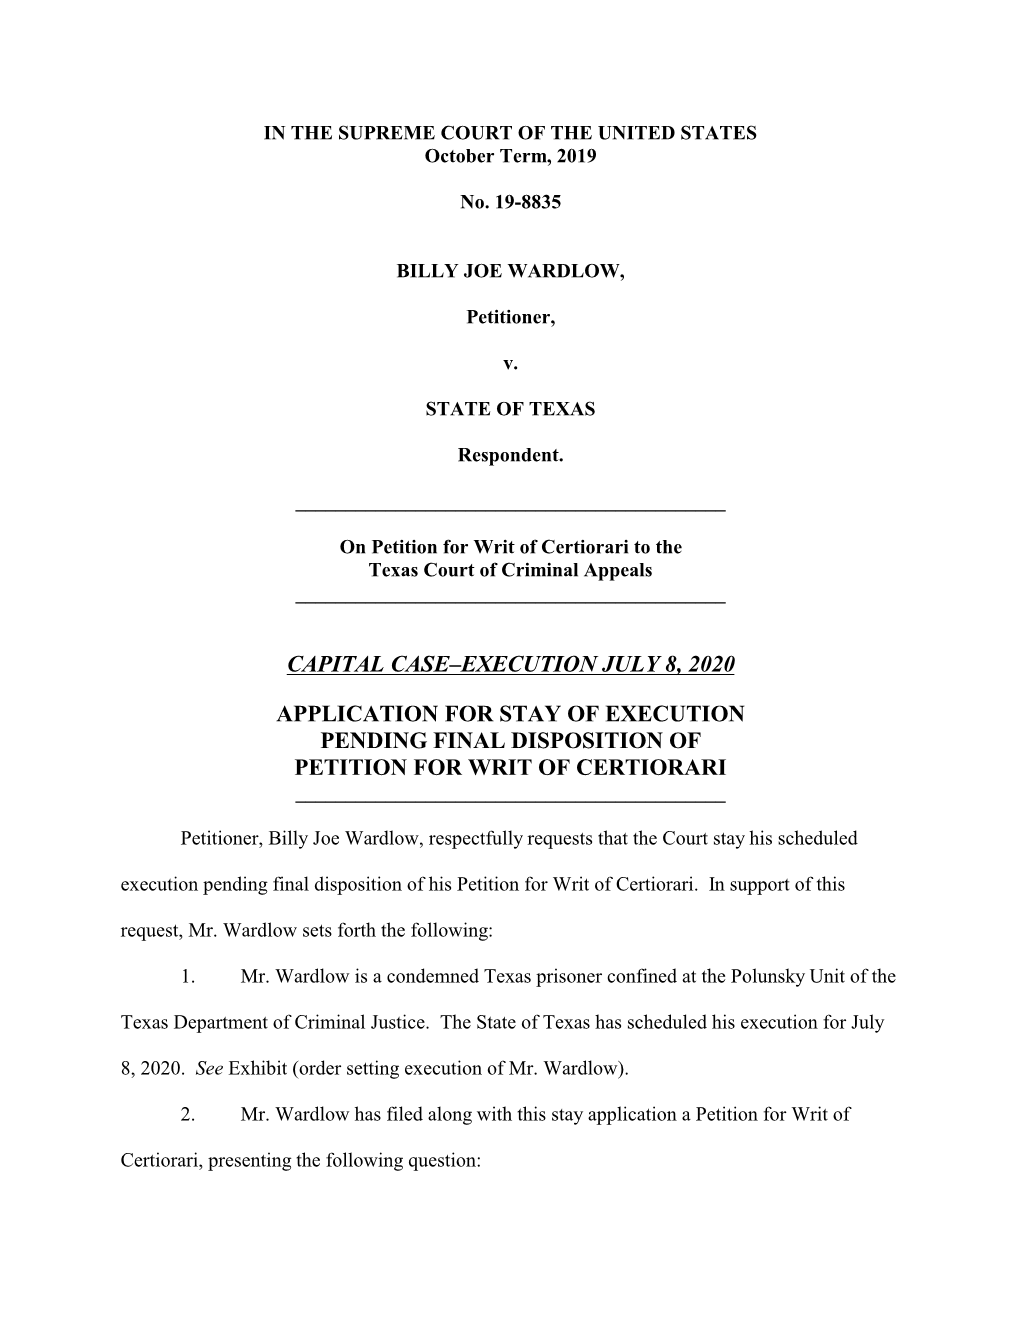 Capital Case–Execution July 8, 2020 Application for Stay